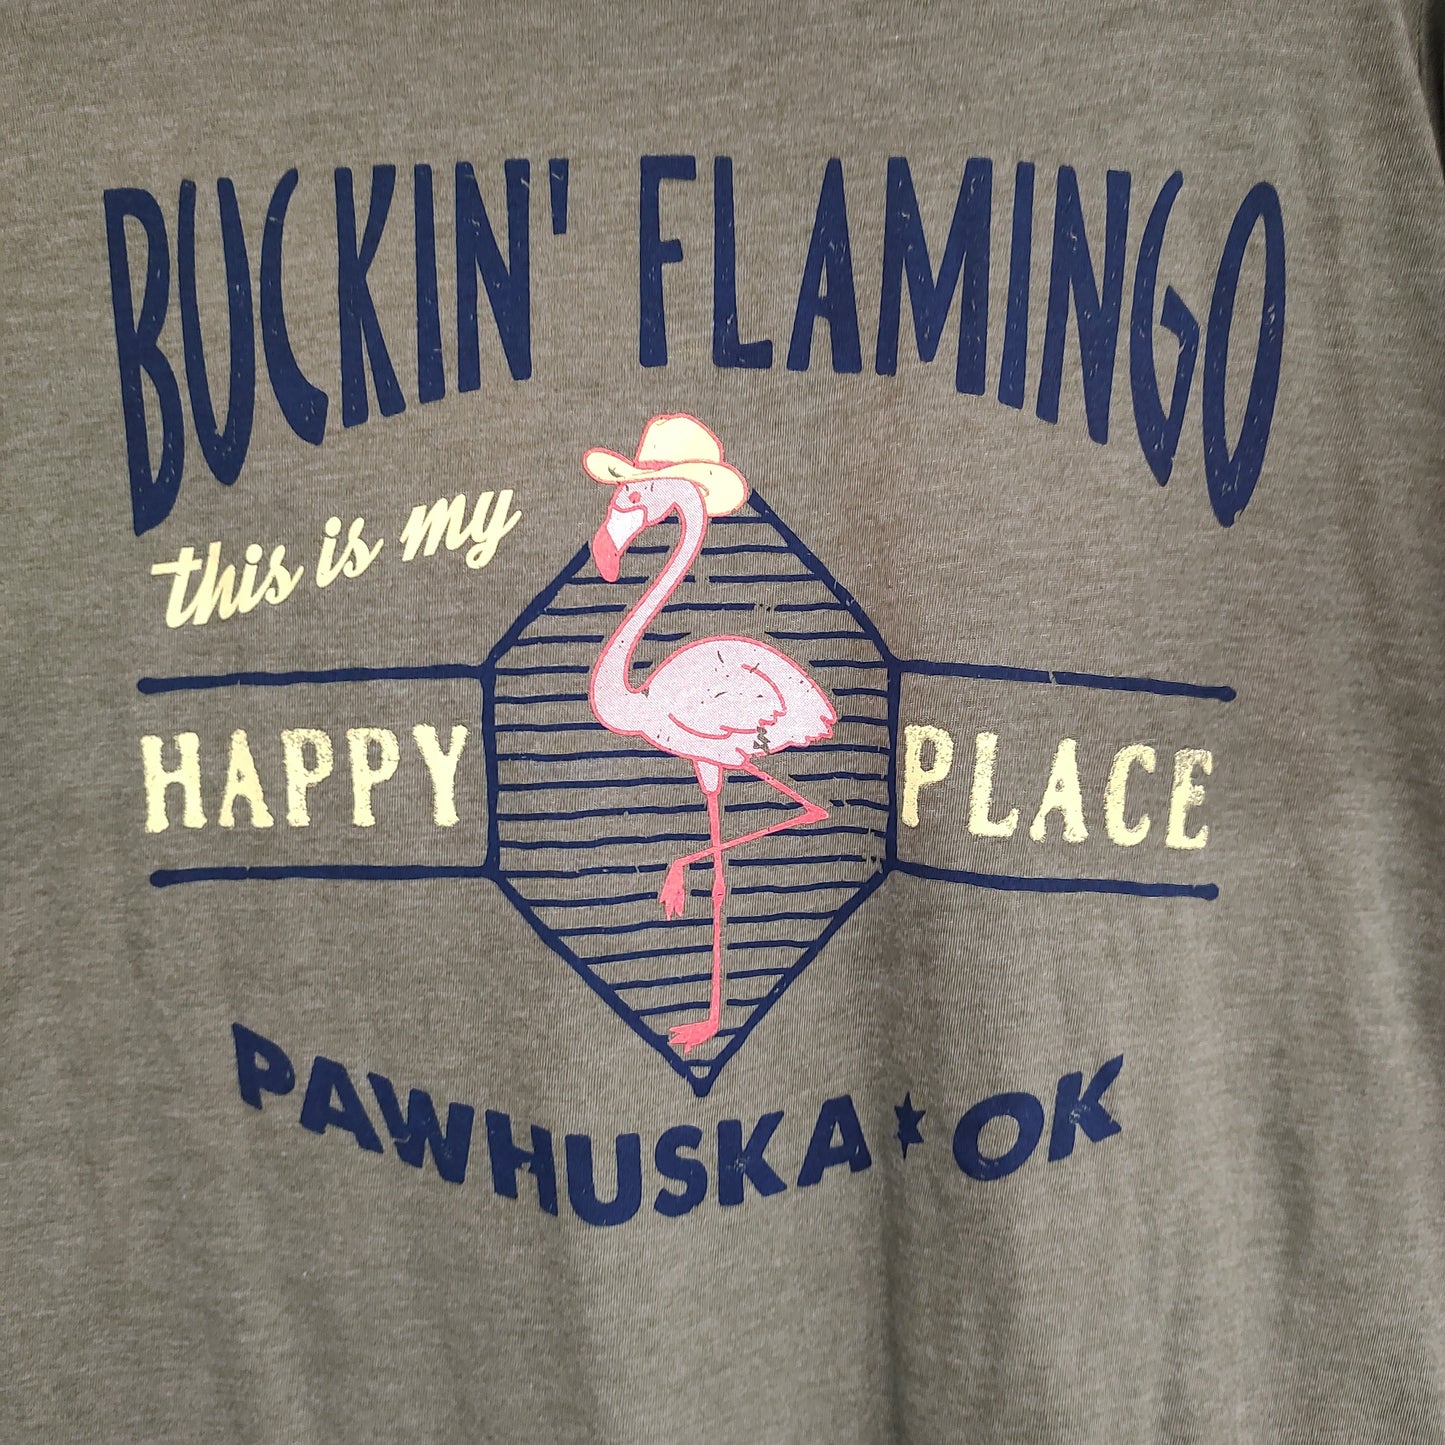 Buckin' Flamingo This is my Happy Place Shirt